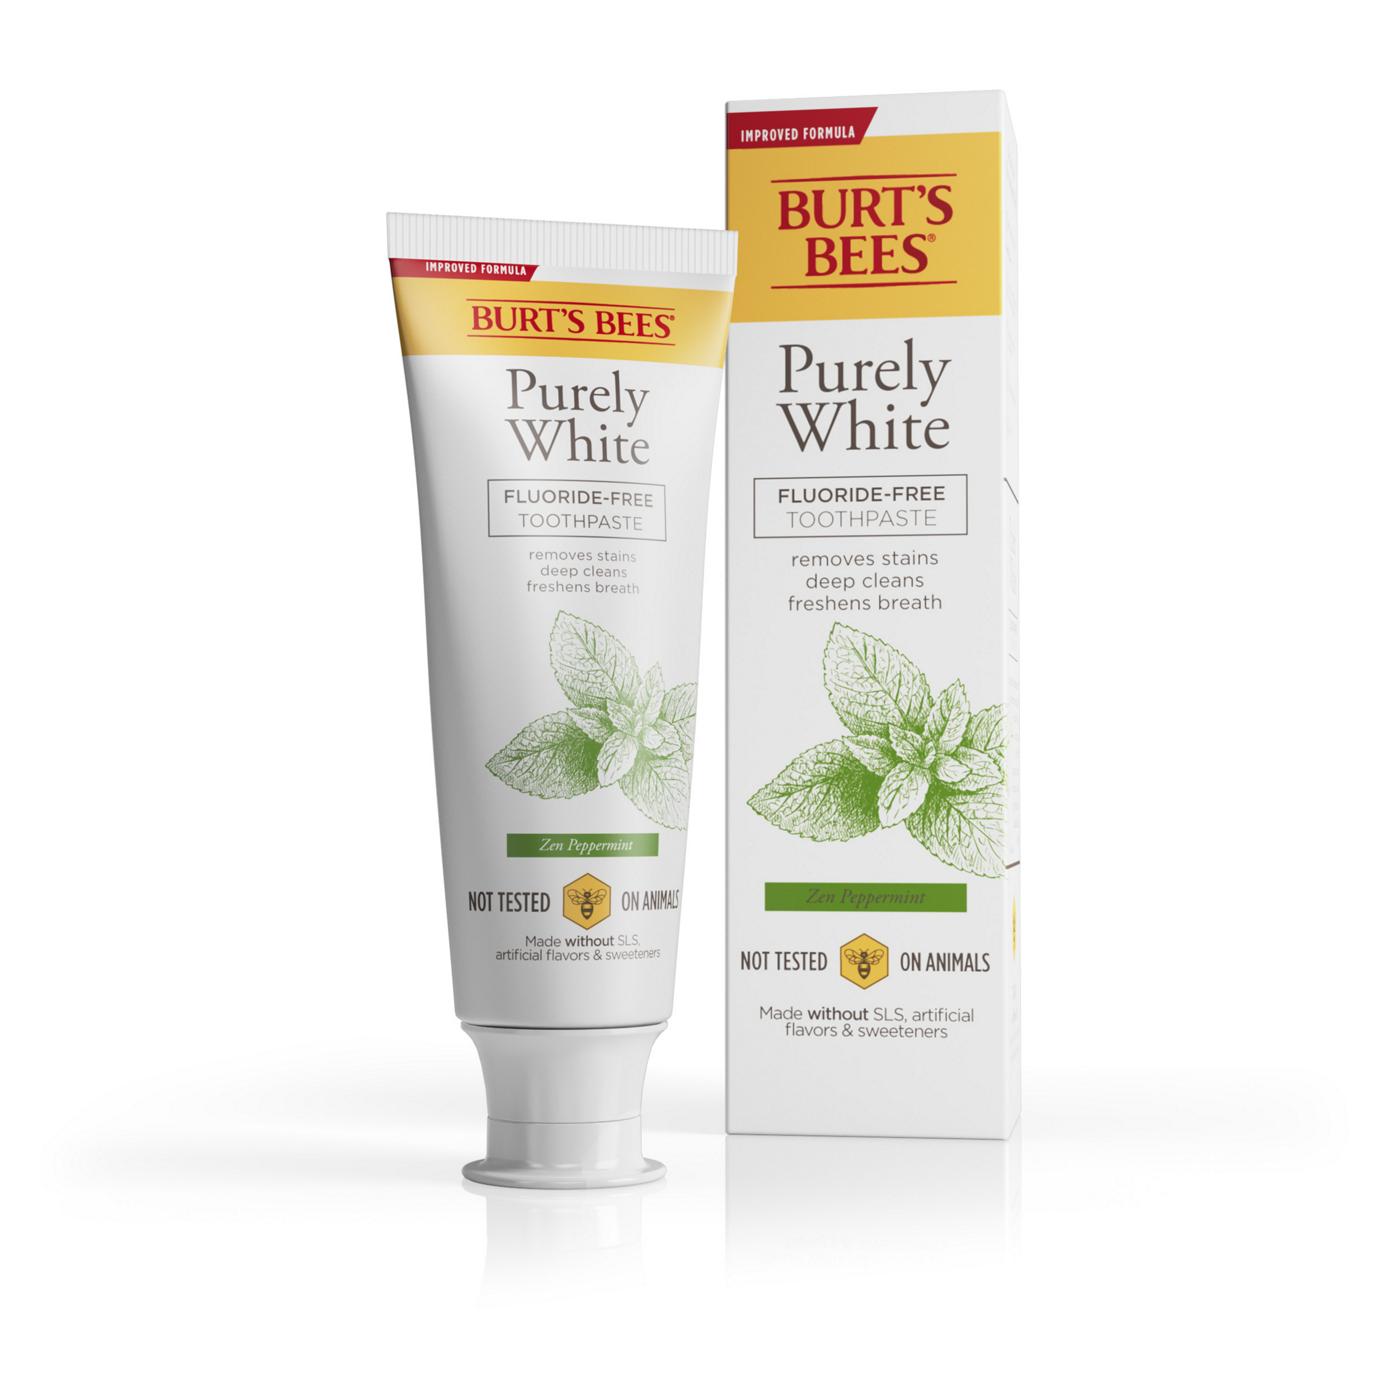 Burt's Bees Purely White Fluoride-Free Toothpaste - Zen Peppermint; image 5 of 8